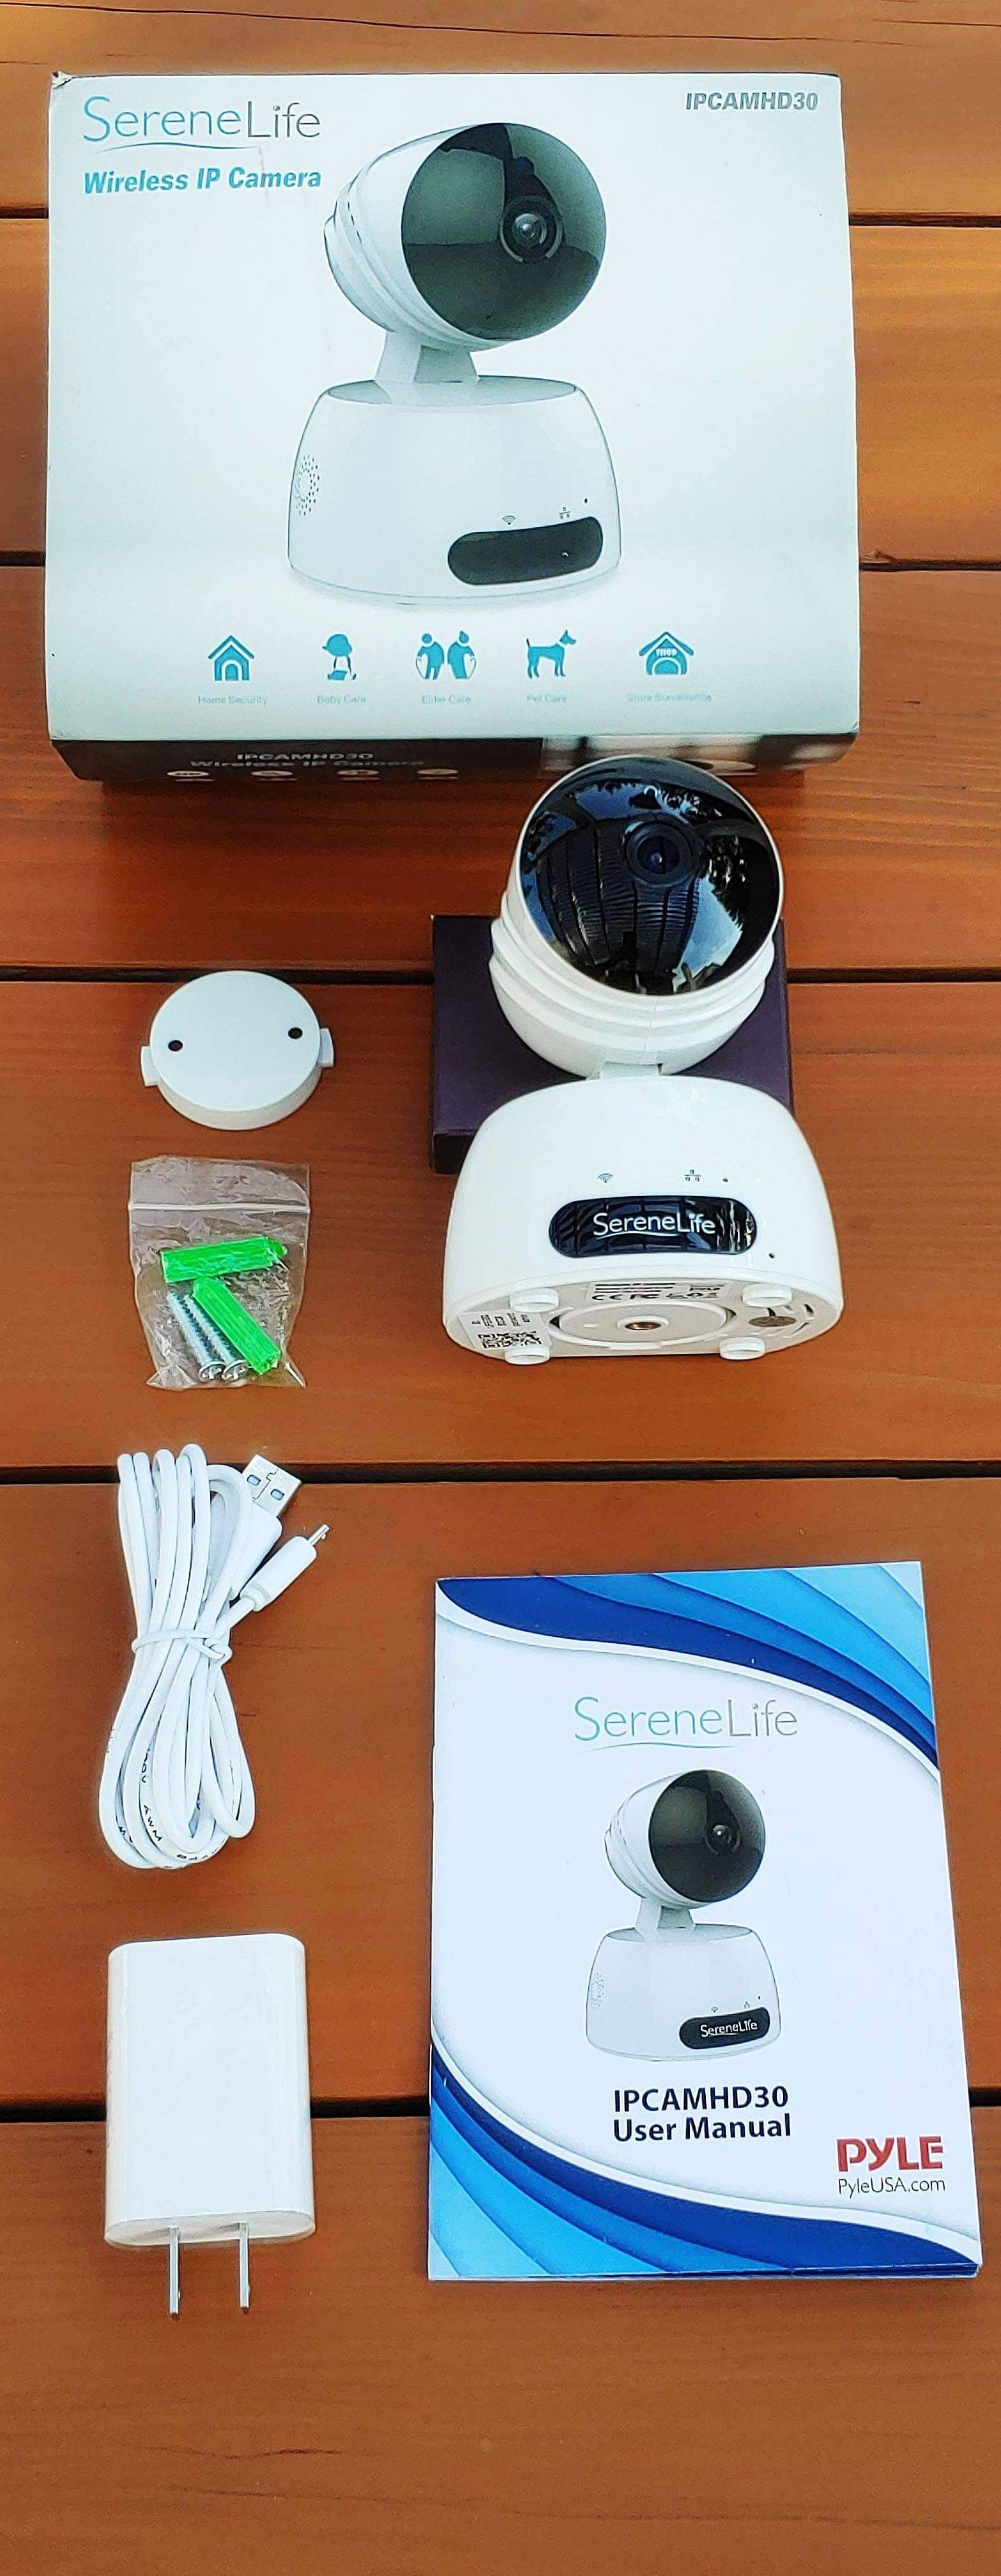 BRAND NEW SereneLife PyleUSA Indoor Wireless IP Camera HD720p Network Security Surveillance Home Monitor Motion Detection Night Vision PTZ 2-Way-Audio